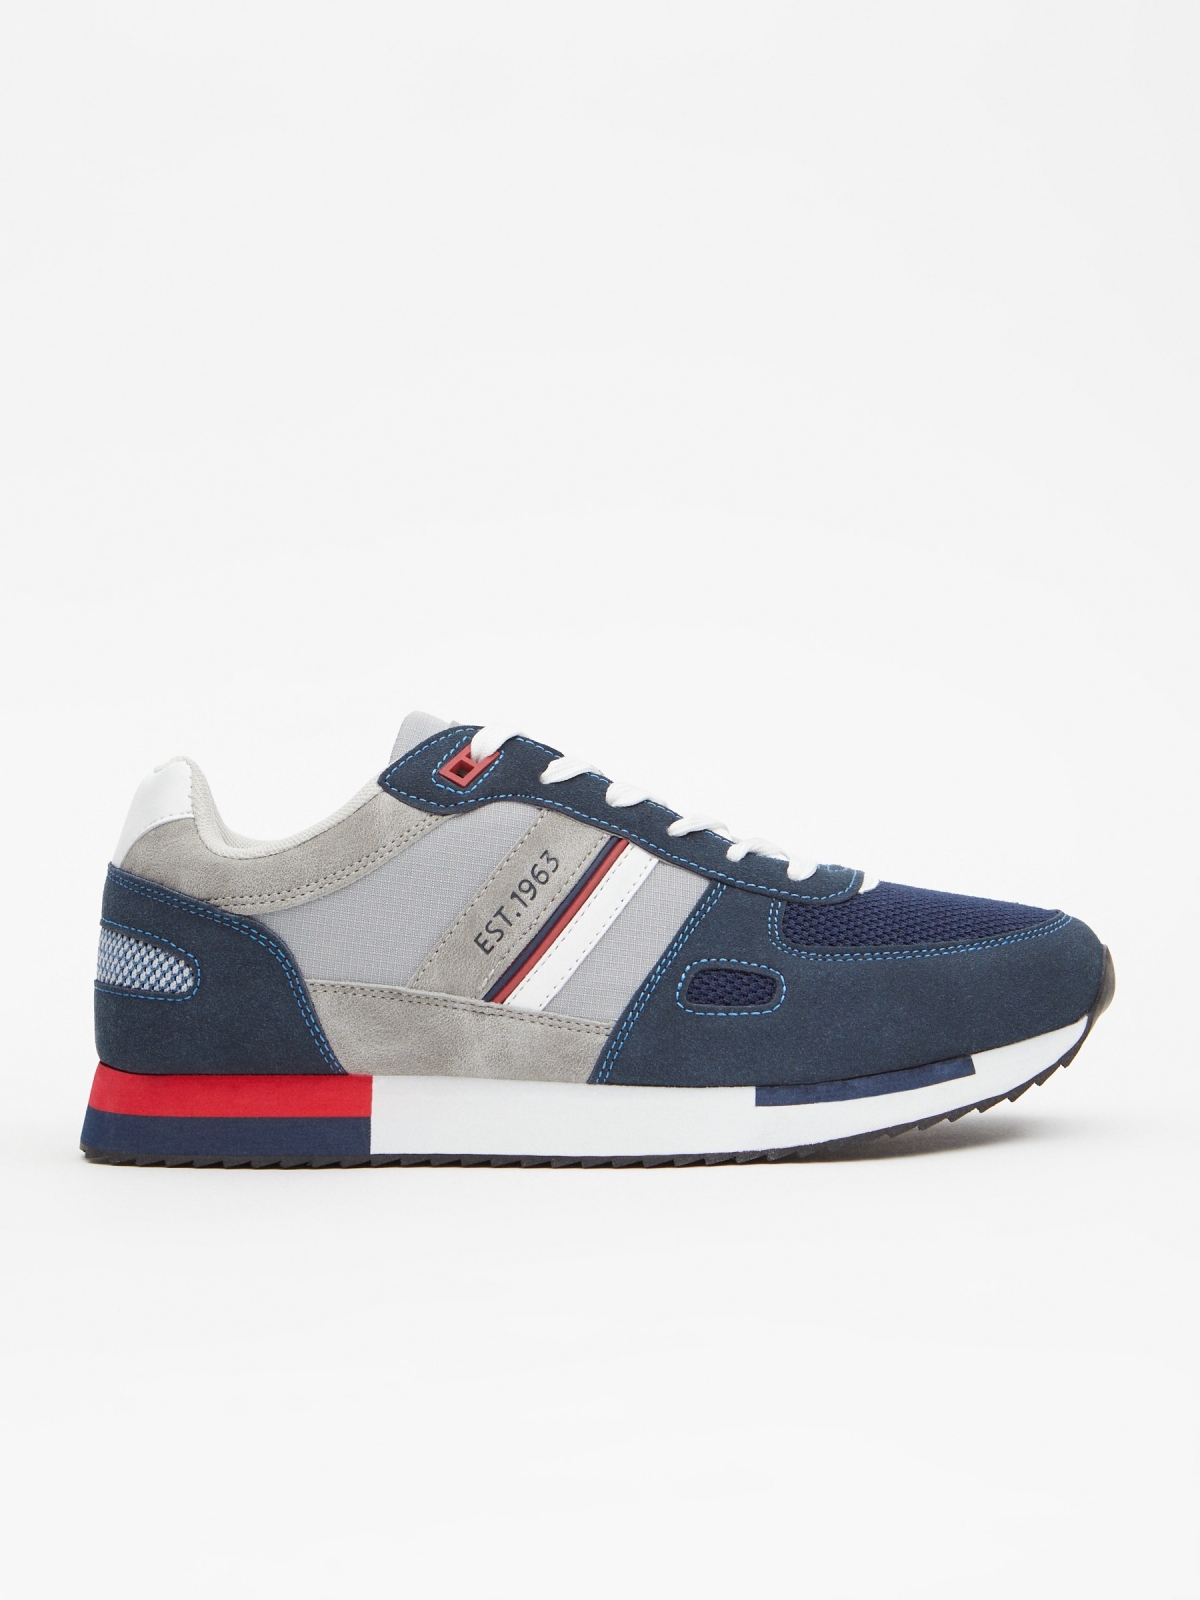 Leather-effect sneaker with combined pieces navy